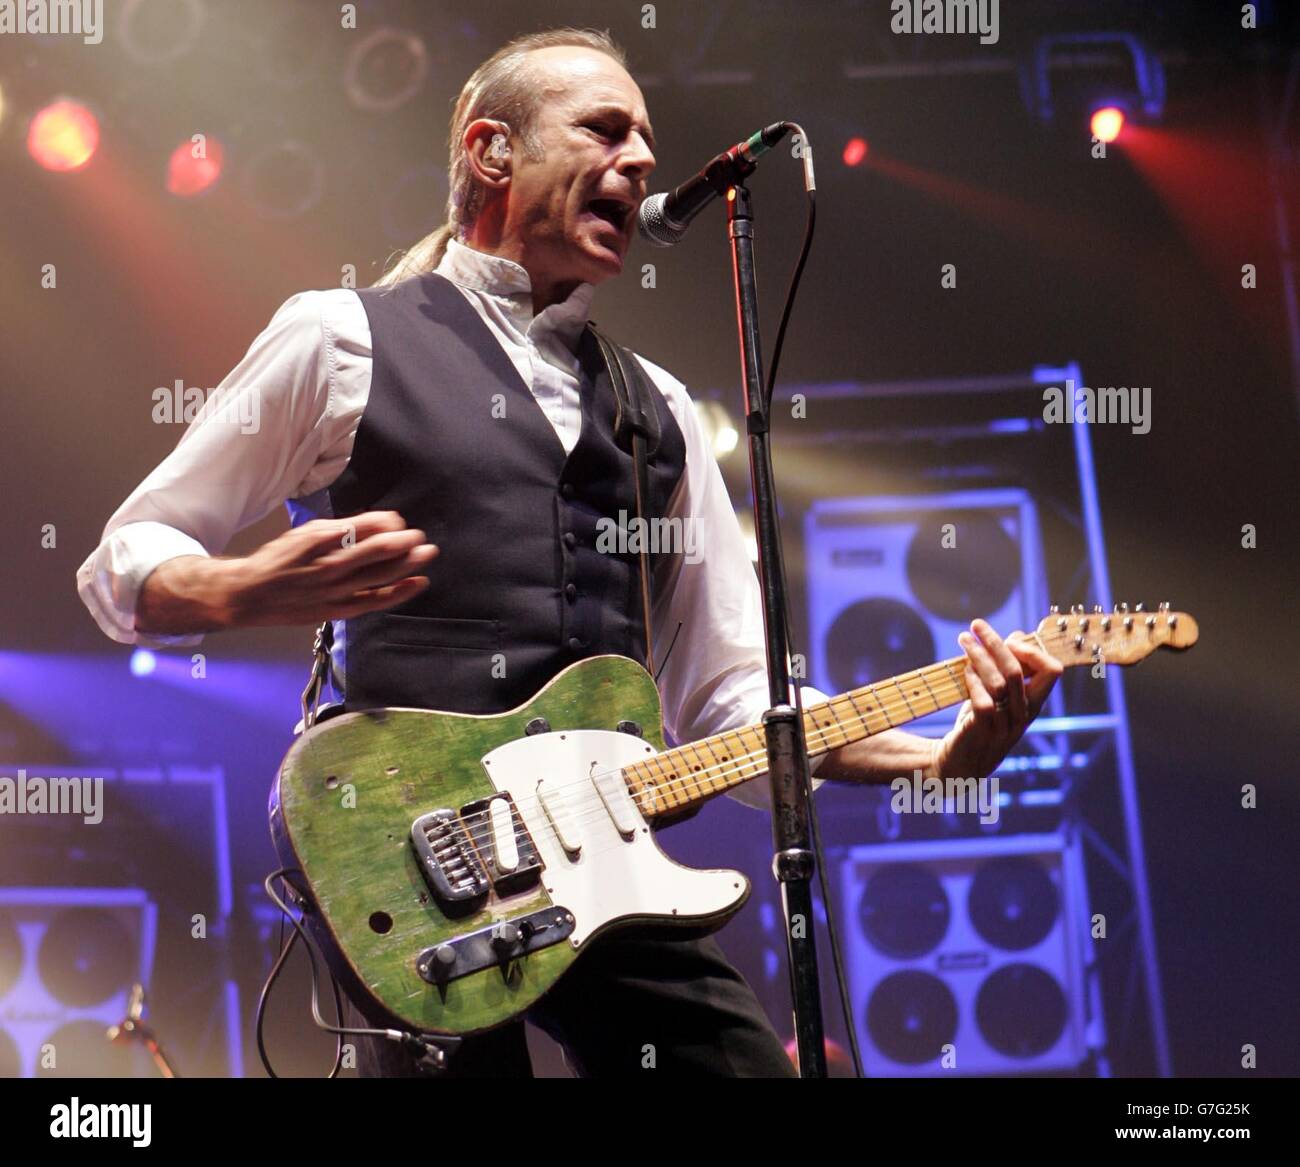 Guitarist Francis Rossi from the rock group Status Quo on stage, during their concert at Wembley Arena in London. Stock Photo